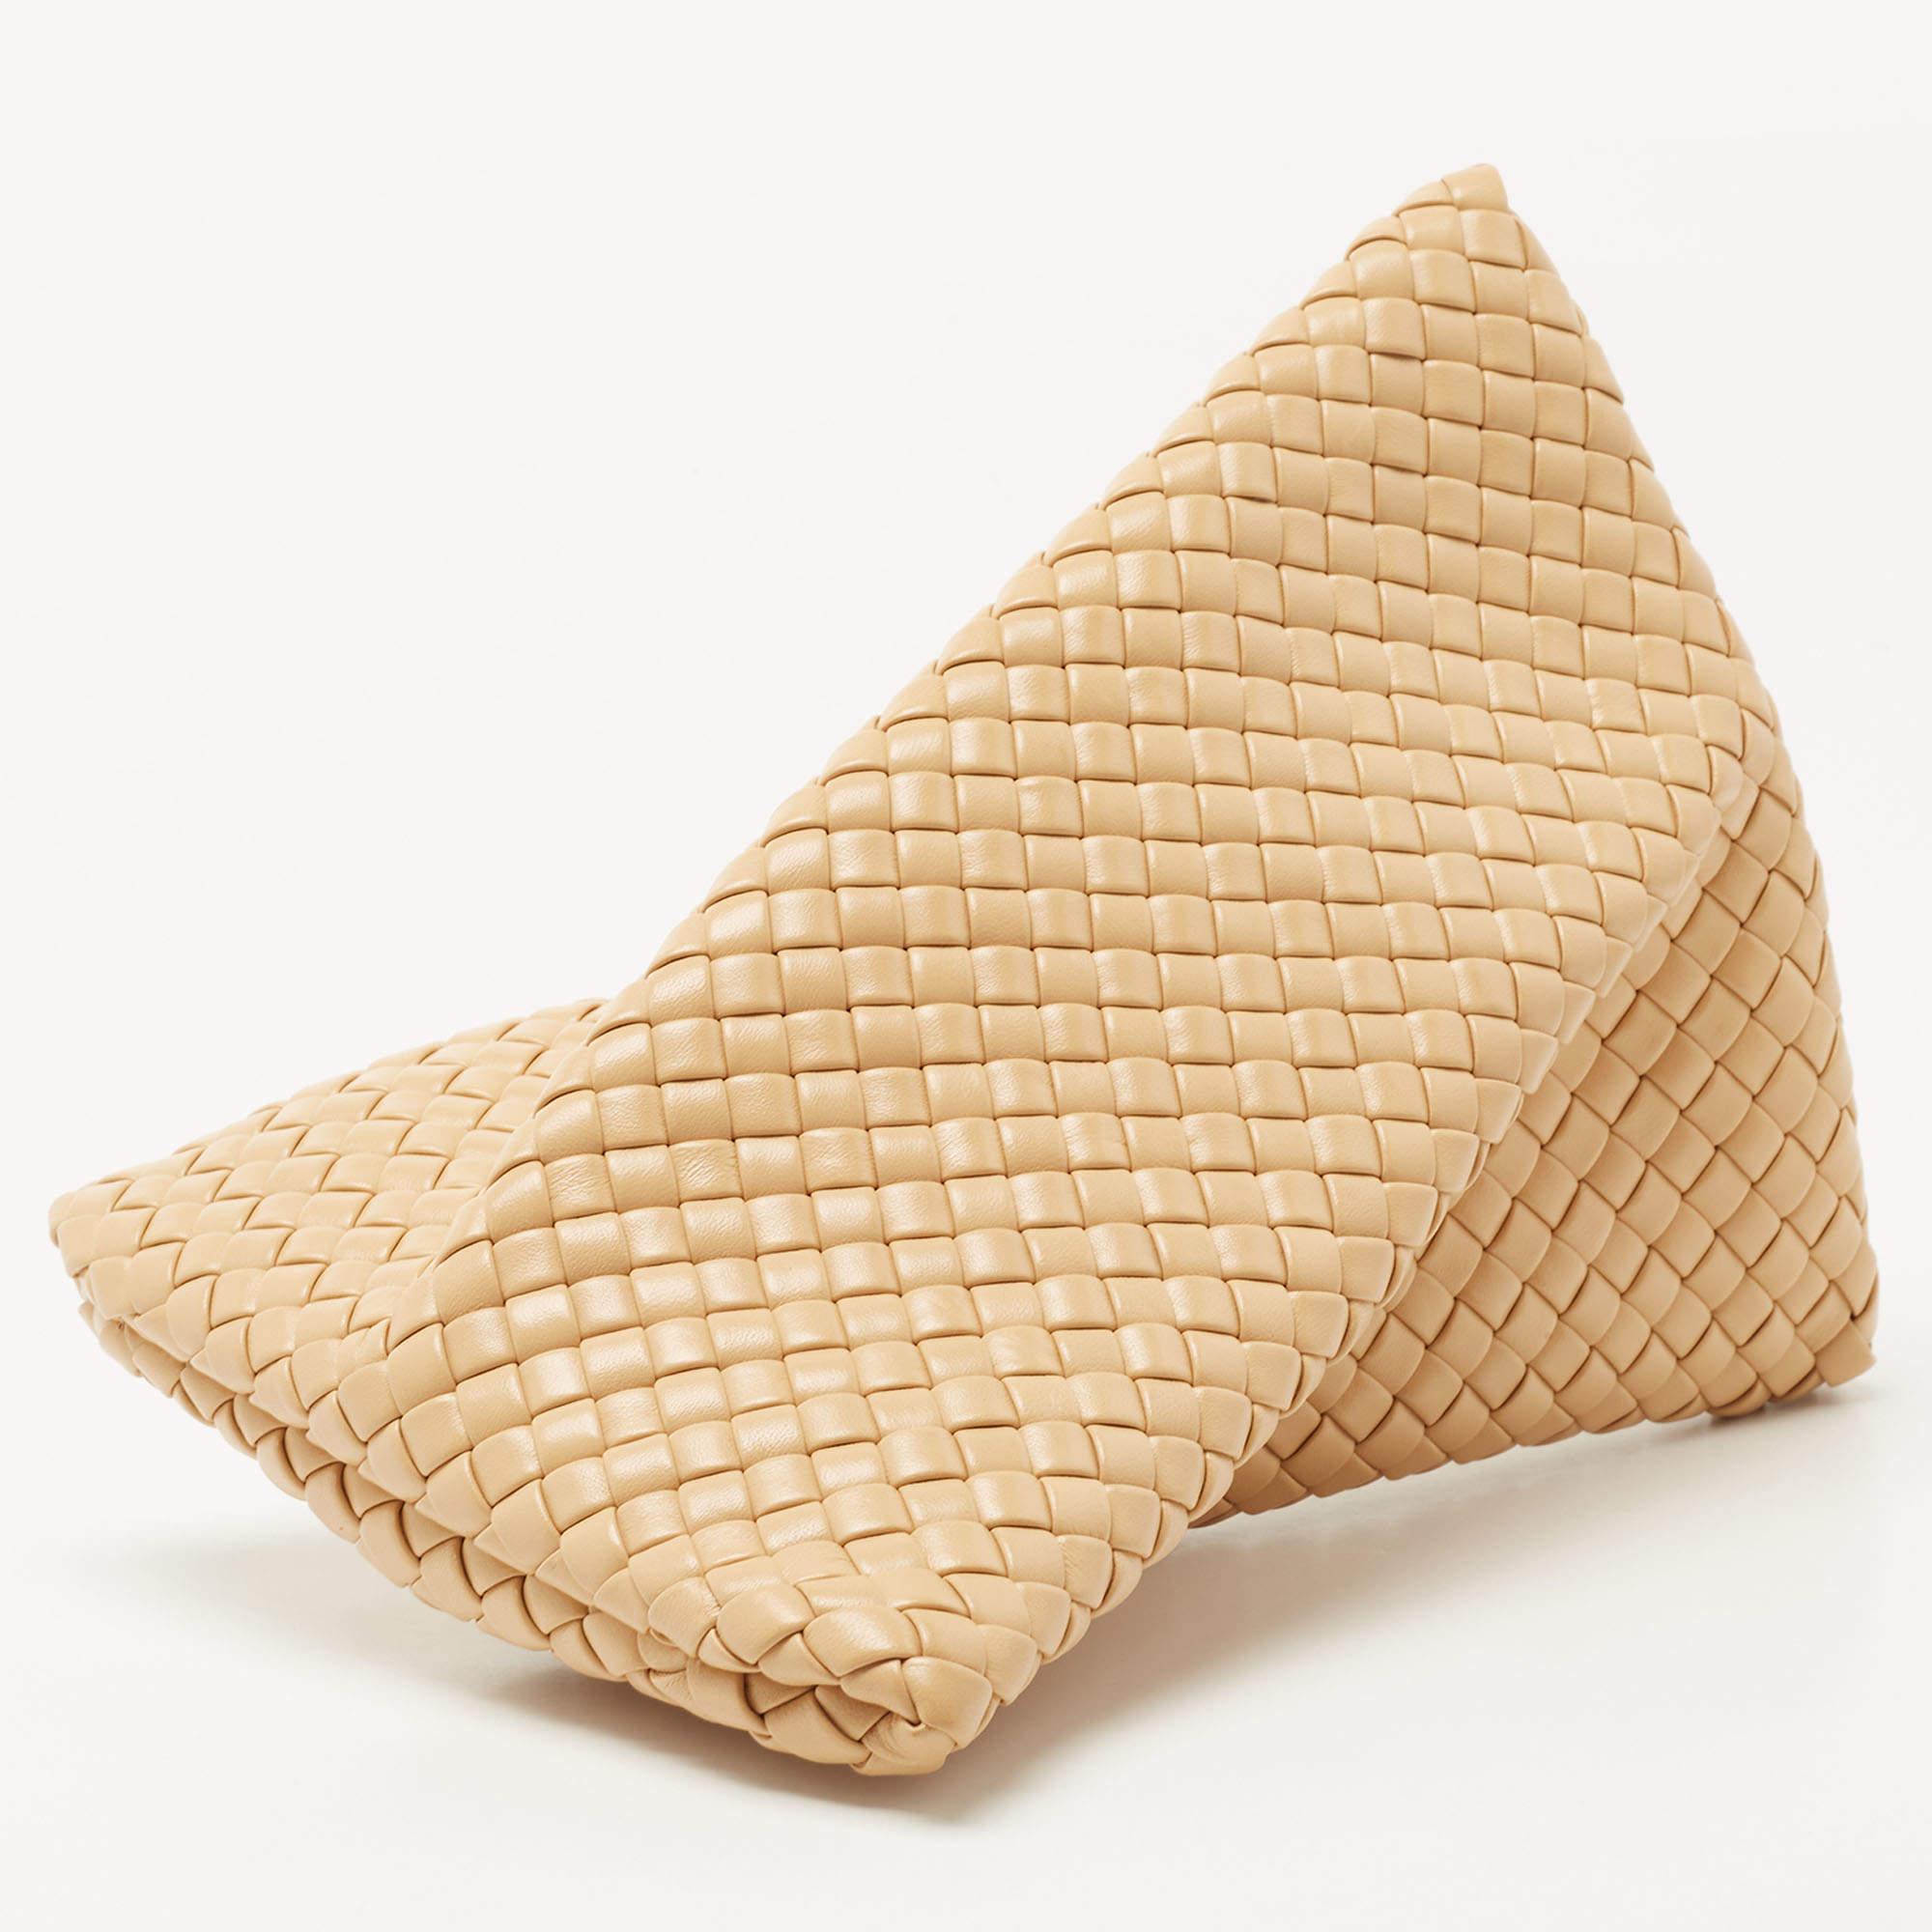 Playing with shapes, Bottega Veneta has created handbags that have enticed fashionistas around the world! One such is this criss-cross-shaped clutch made using leather in the Intrecciato weave. The pretty beige hue gives the silhouette a feminine